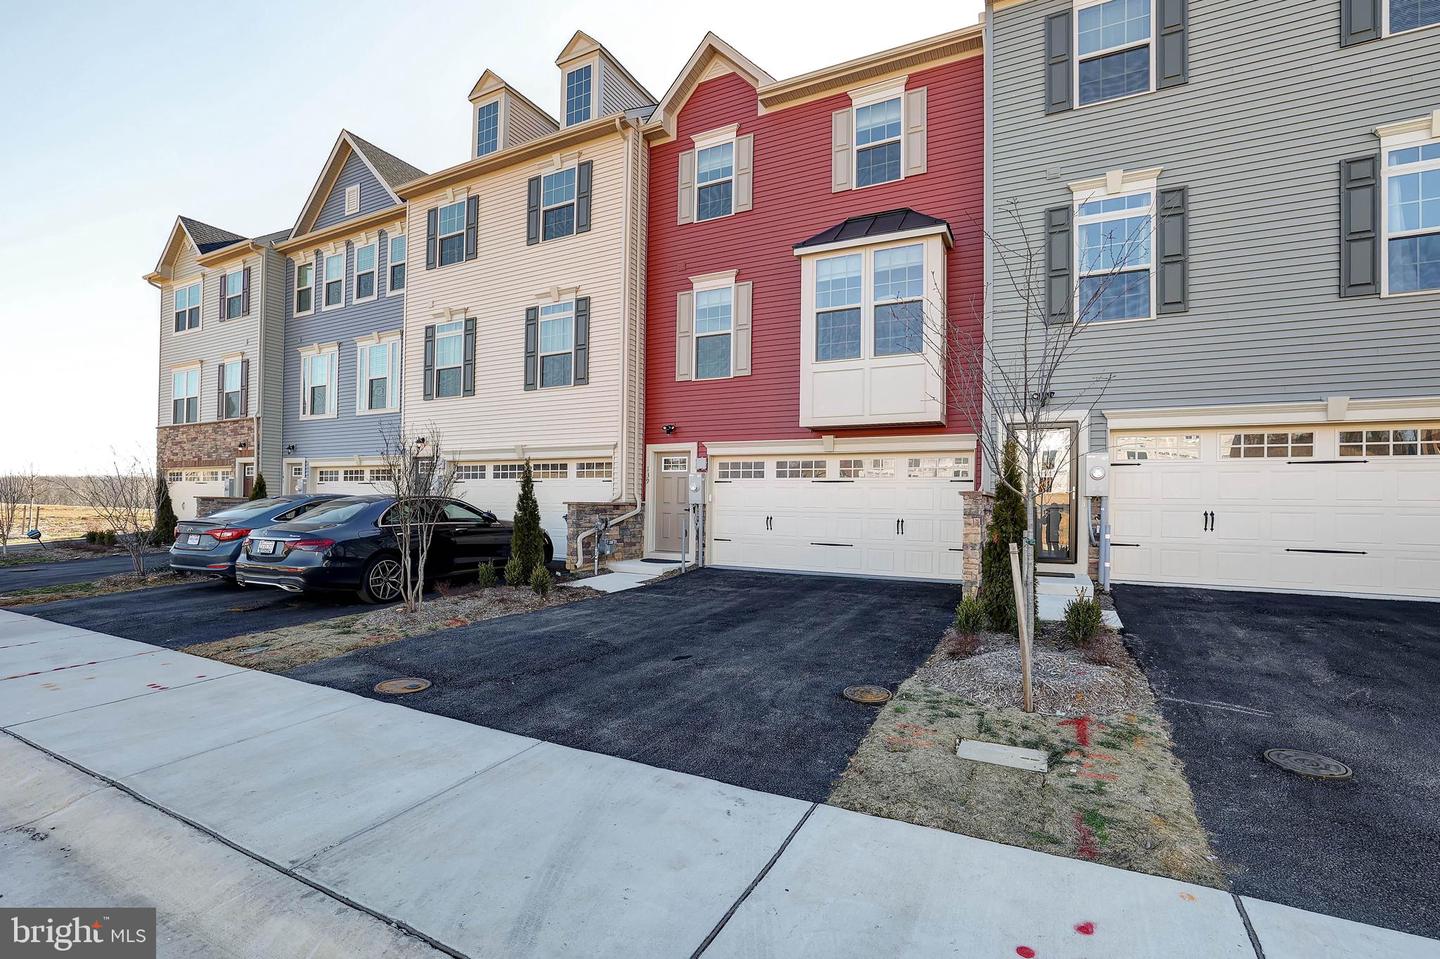 View Brooklyn Park, MD 21225 townhome